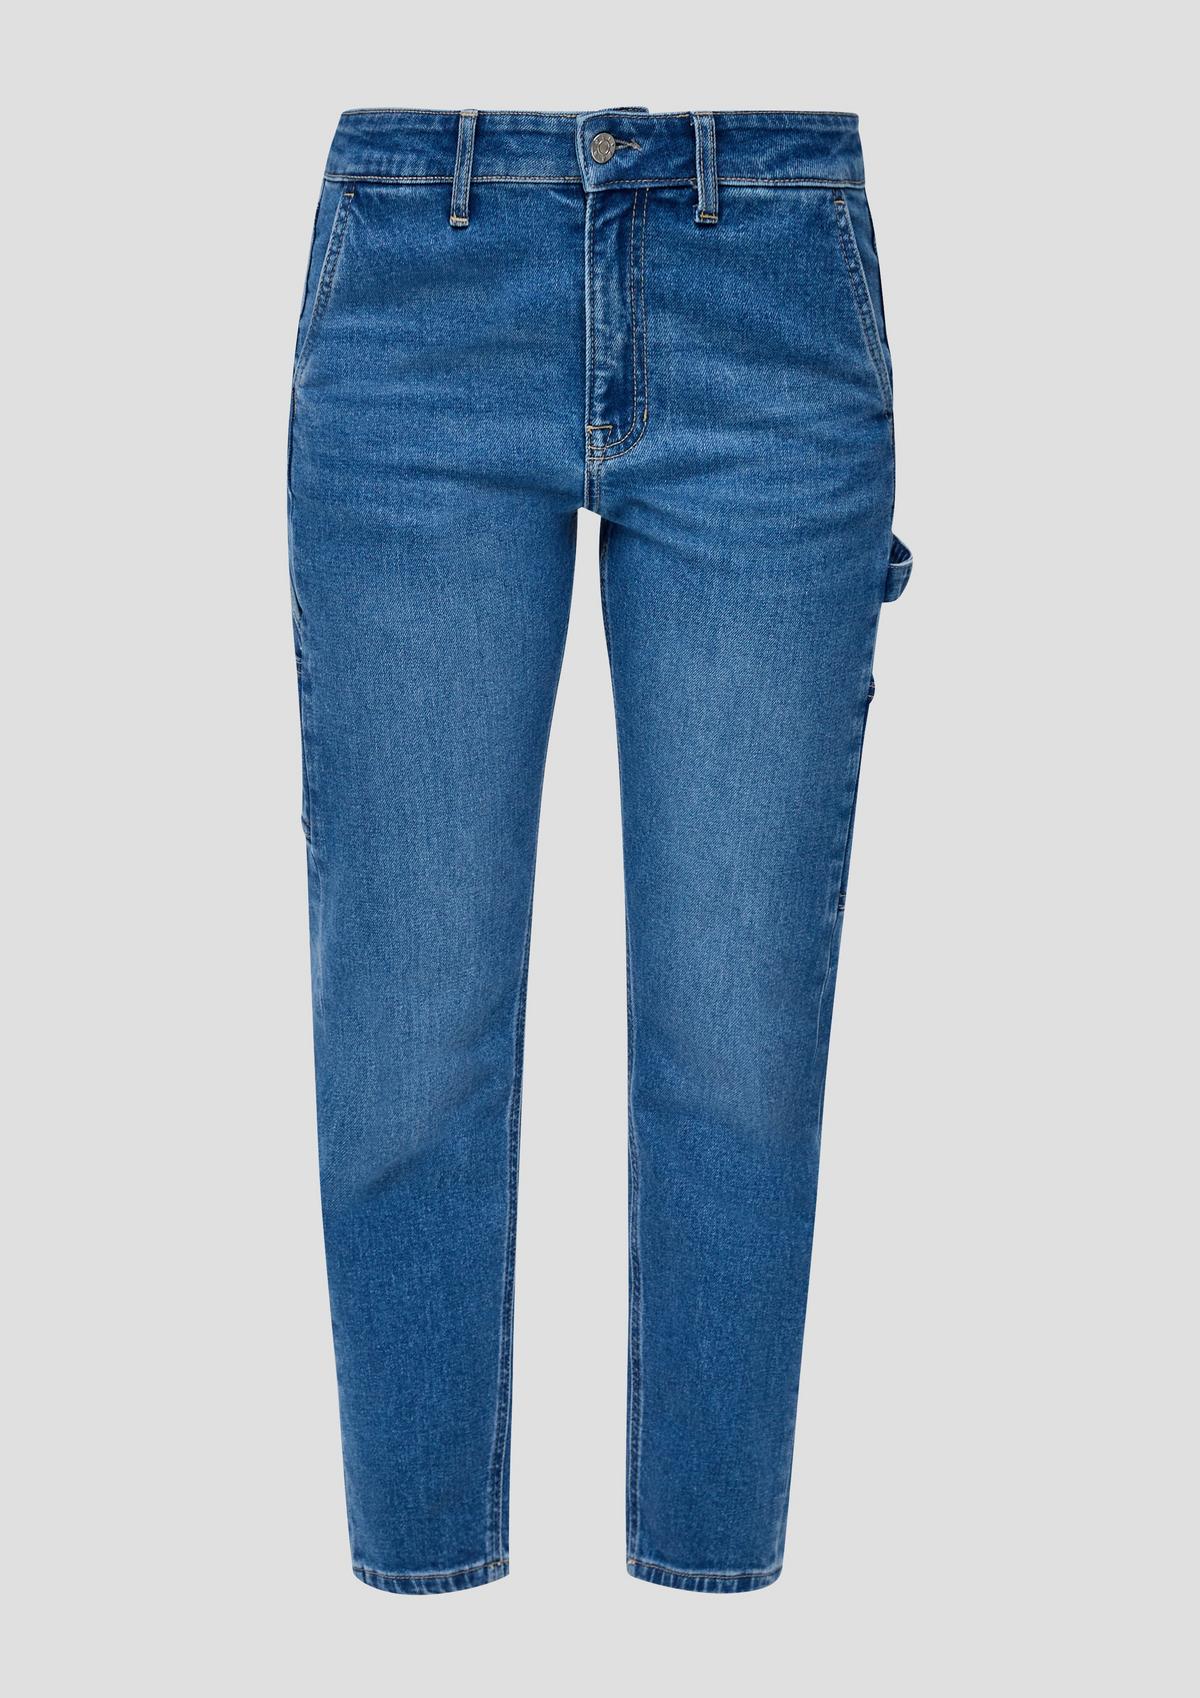 s.Oliver Enkeljeans Francis / relaxed fit / mid rise / tapered leg / boyfriend